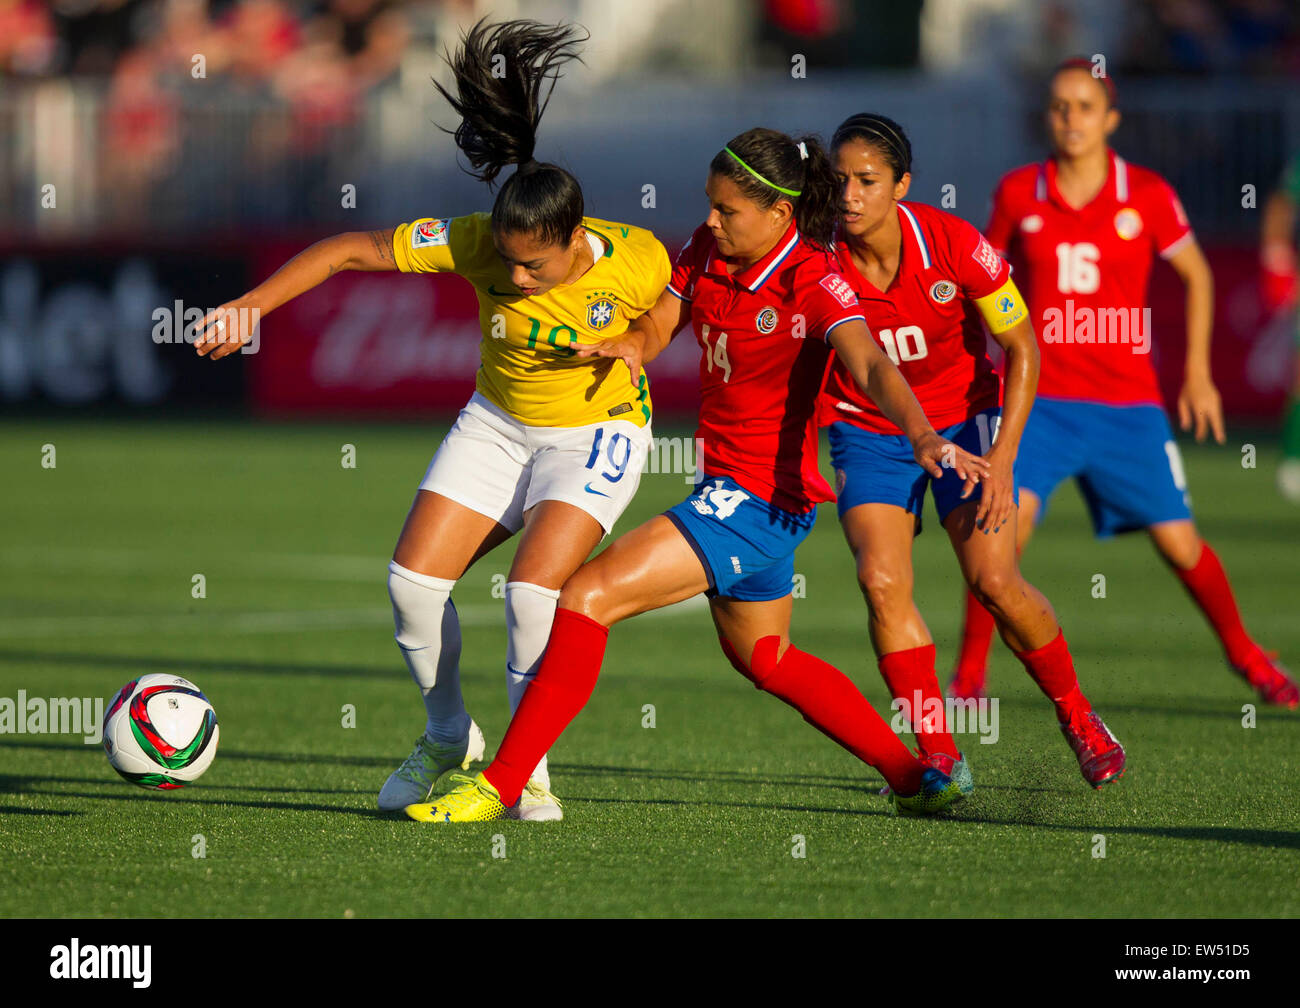 Moncton, Canada. 17th June, 2015. Maurine (1st L) of Brazil vies with Maria Barrantes (2nd L) of Costa Rica during their group E match at the 2015 FIFA Women's World Cup in Moncton, Canada, June 17, 2015. Brazil won 1-0 and advanced to the round of 16. © Zou Zheng/Xinhua/Alamy Live News Stock Photo